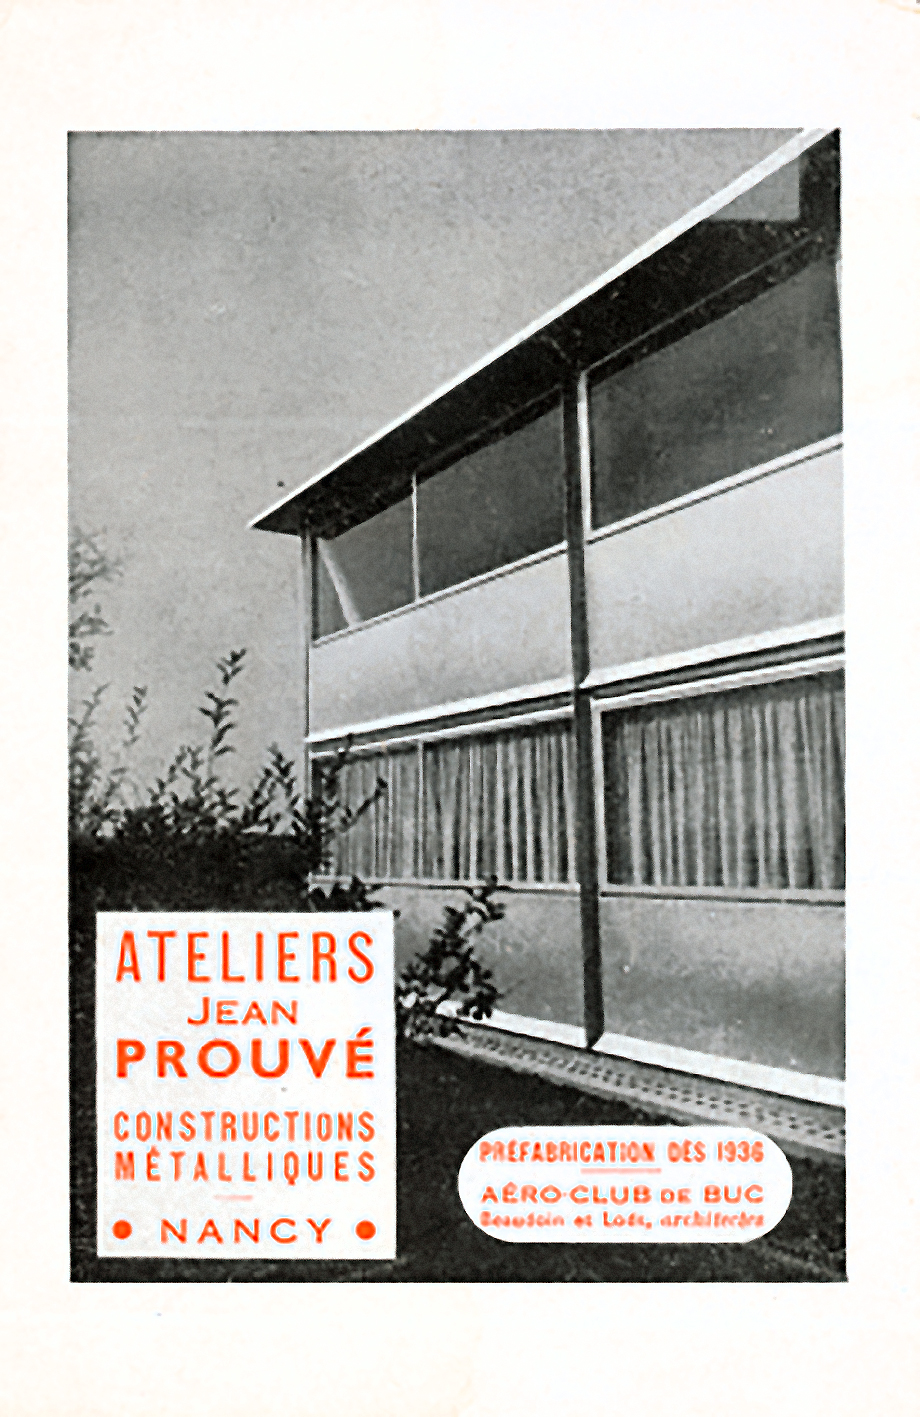 Advertisement of the Ateliers Jean Prouvé in <i>L’Architecture d’aujourd’hui,</i> June-July 1944.